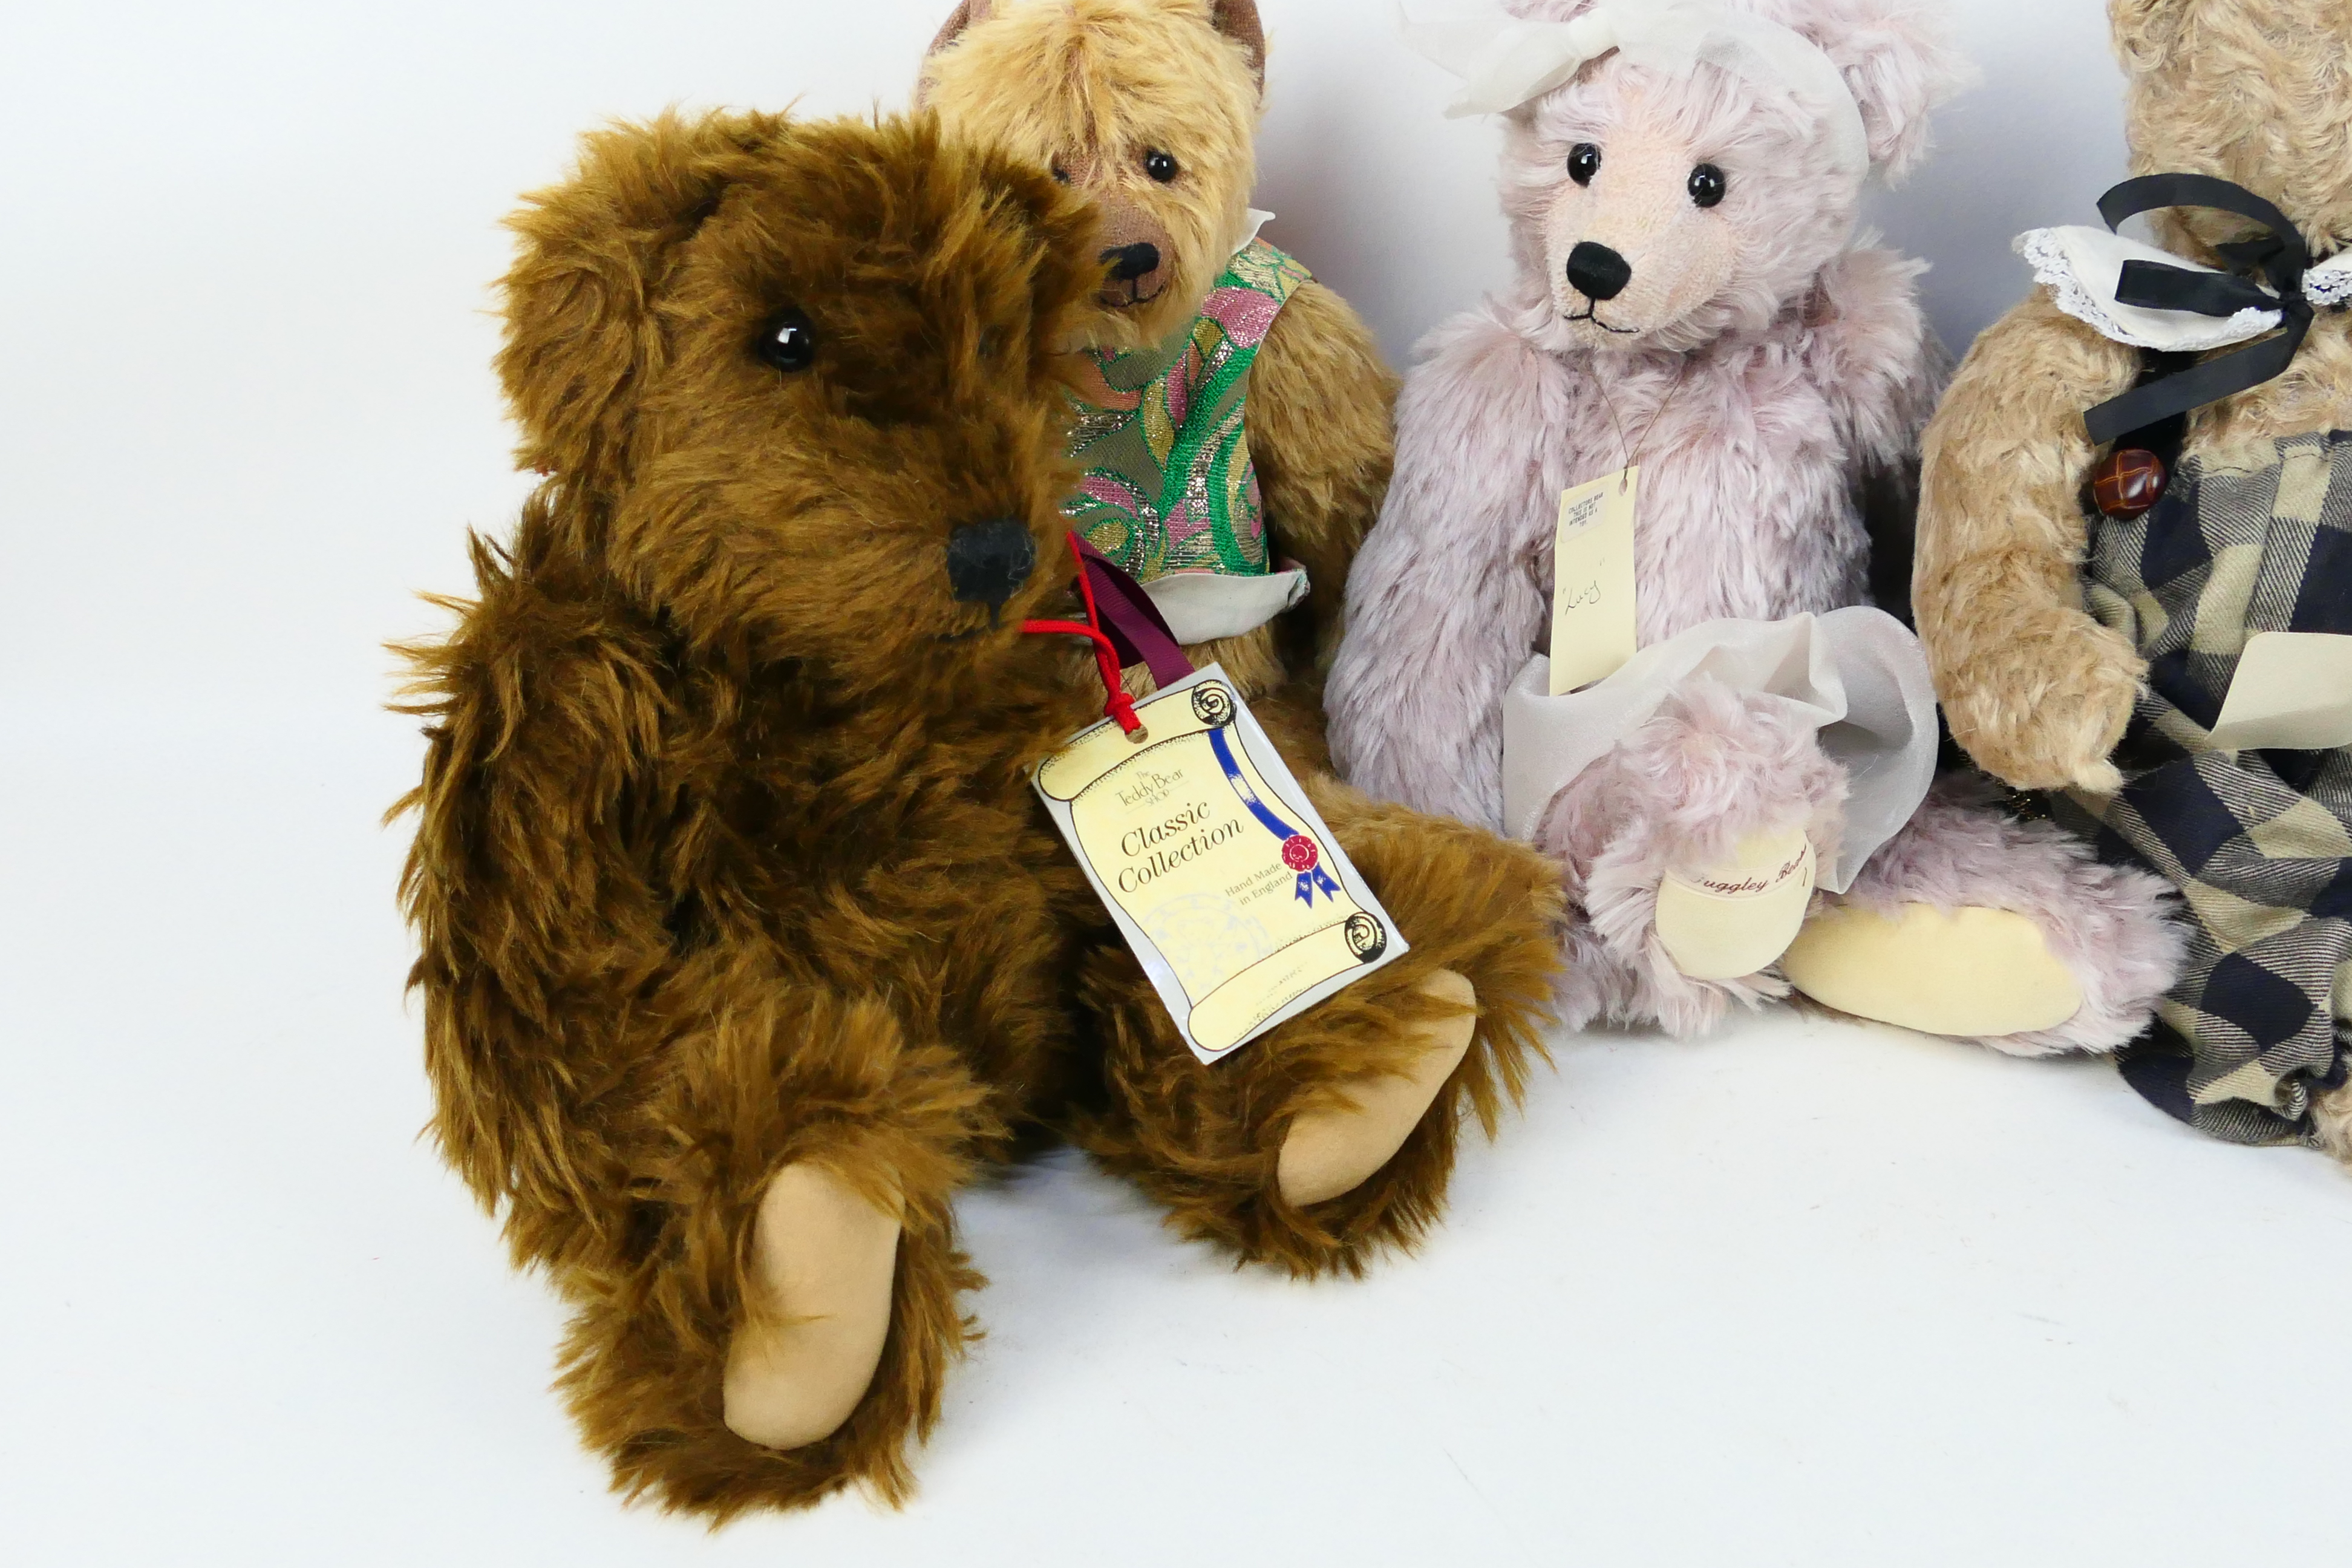 Bilbo Bears, Cottage Collectibles, The Teddy Bear Shop, DaDo Crafts, Juggley Bears, - Image 2 of 5